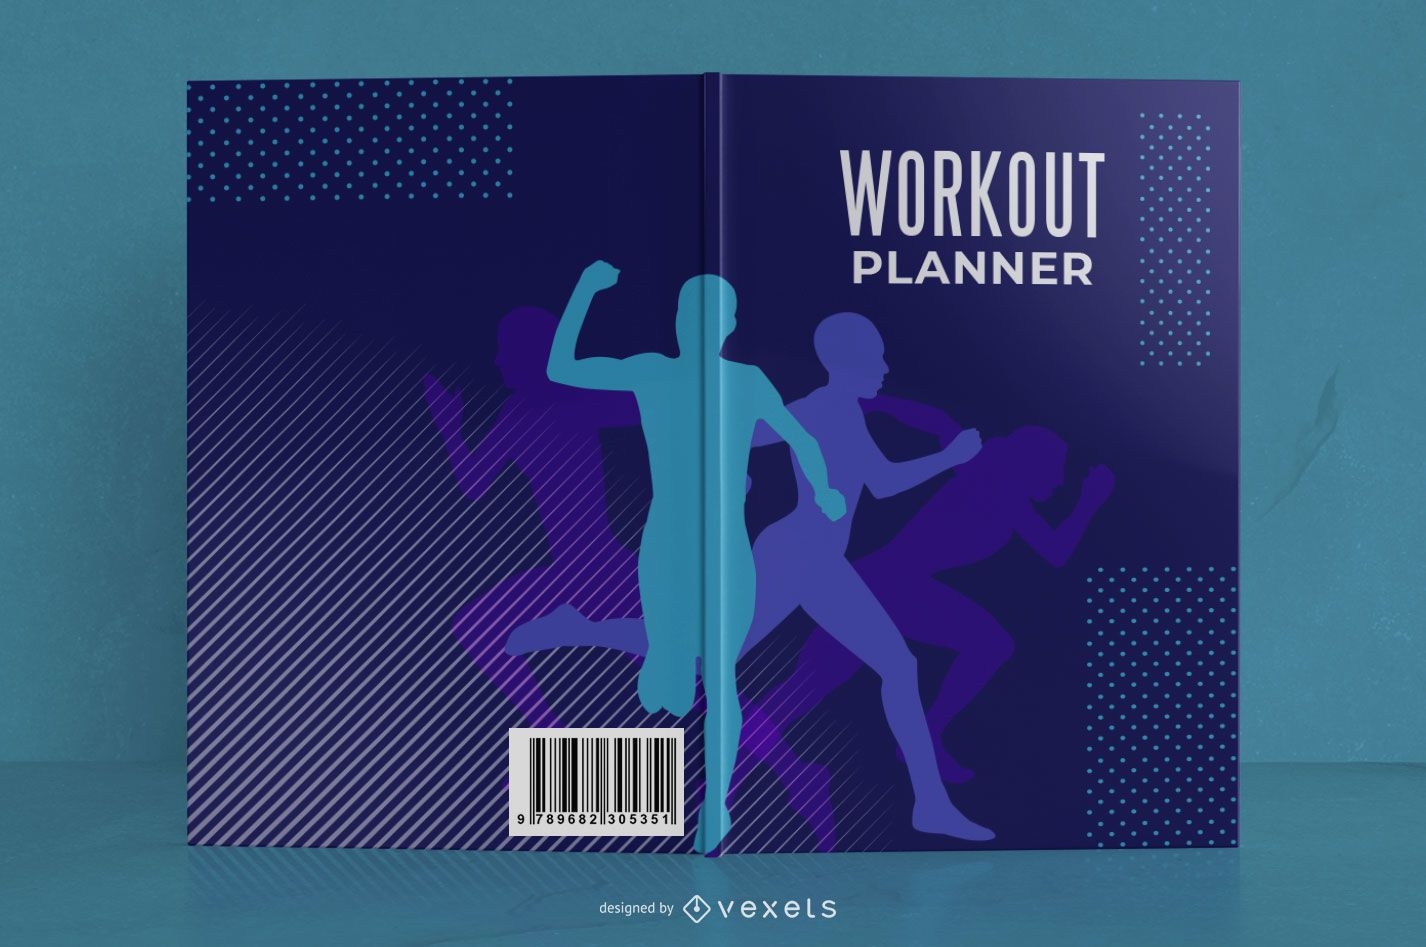 Workout planner book cover design